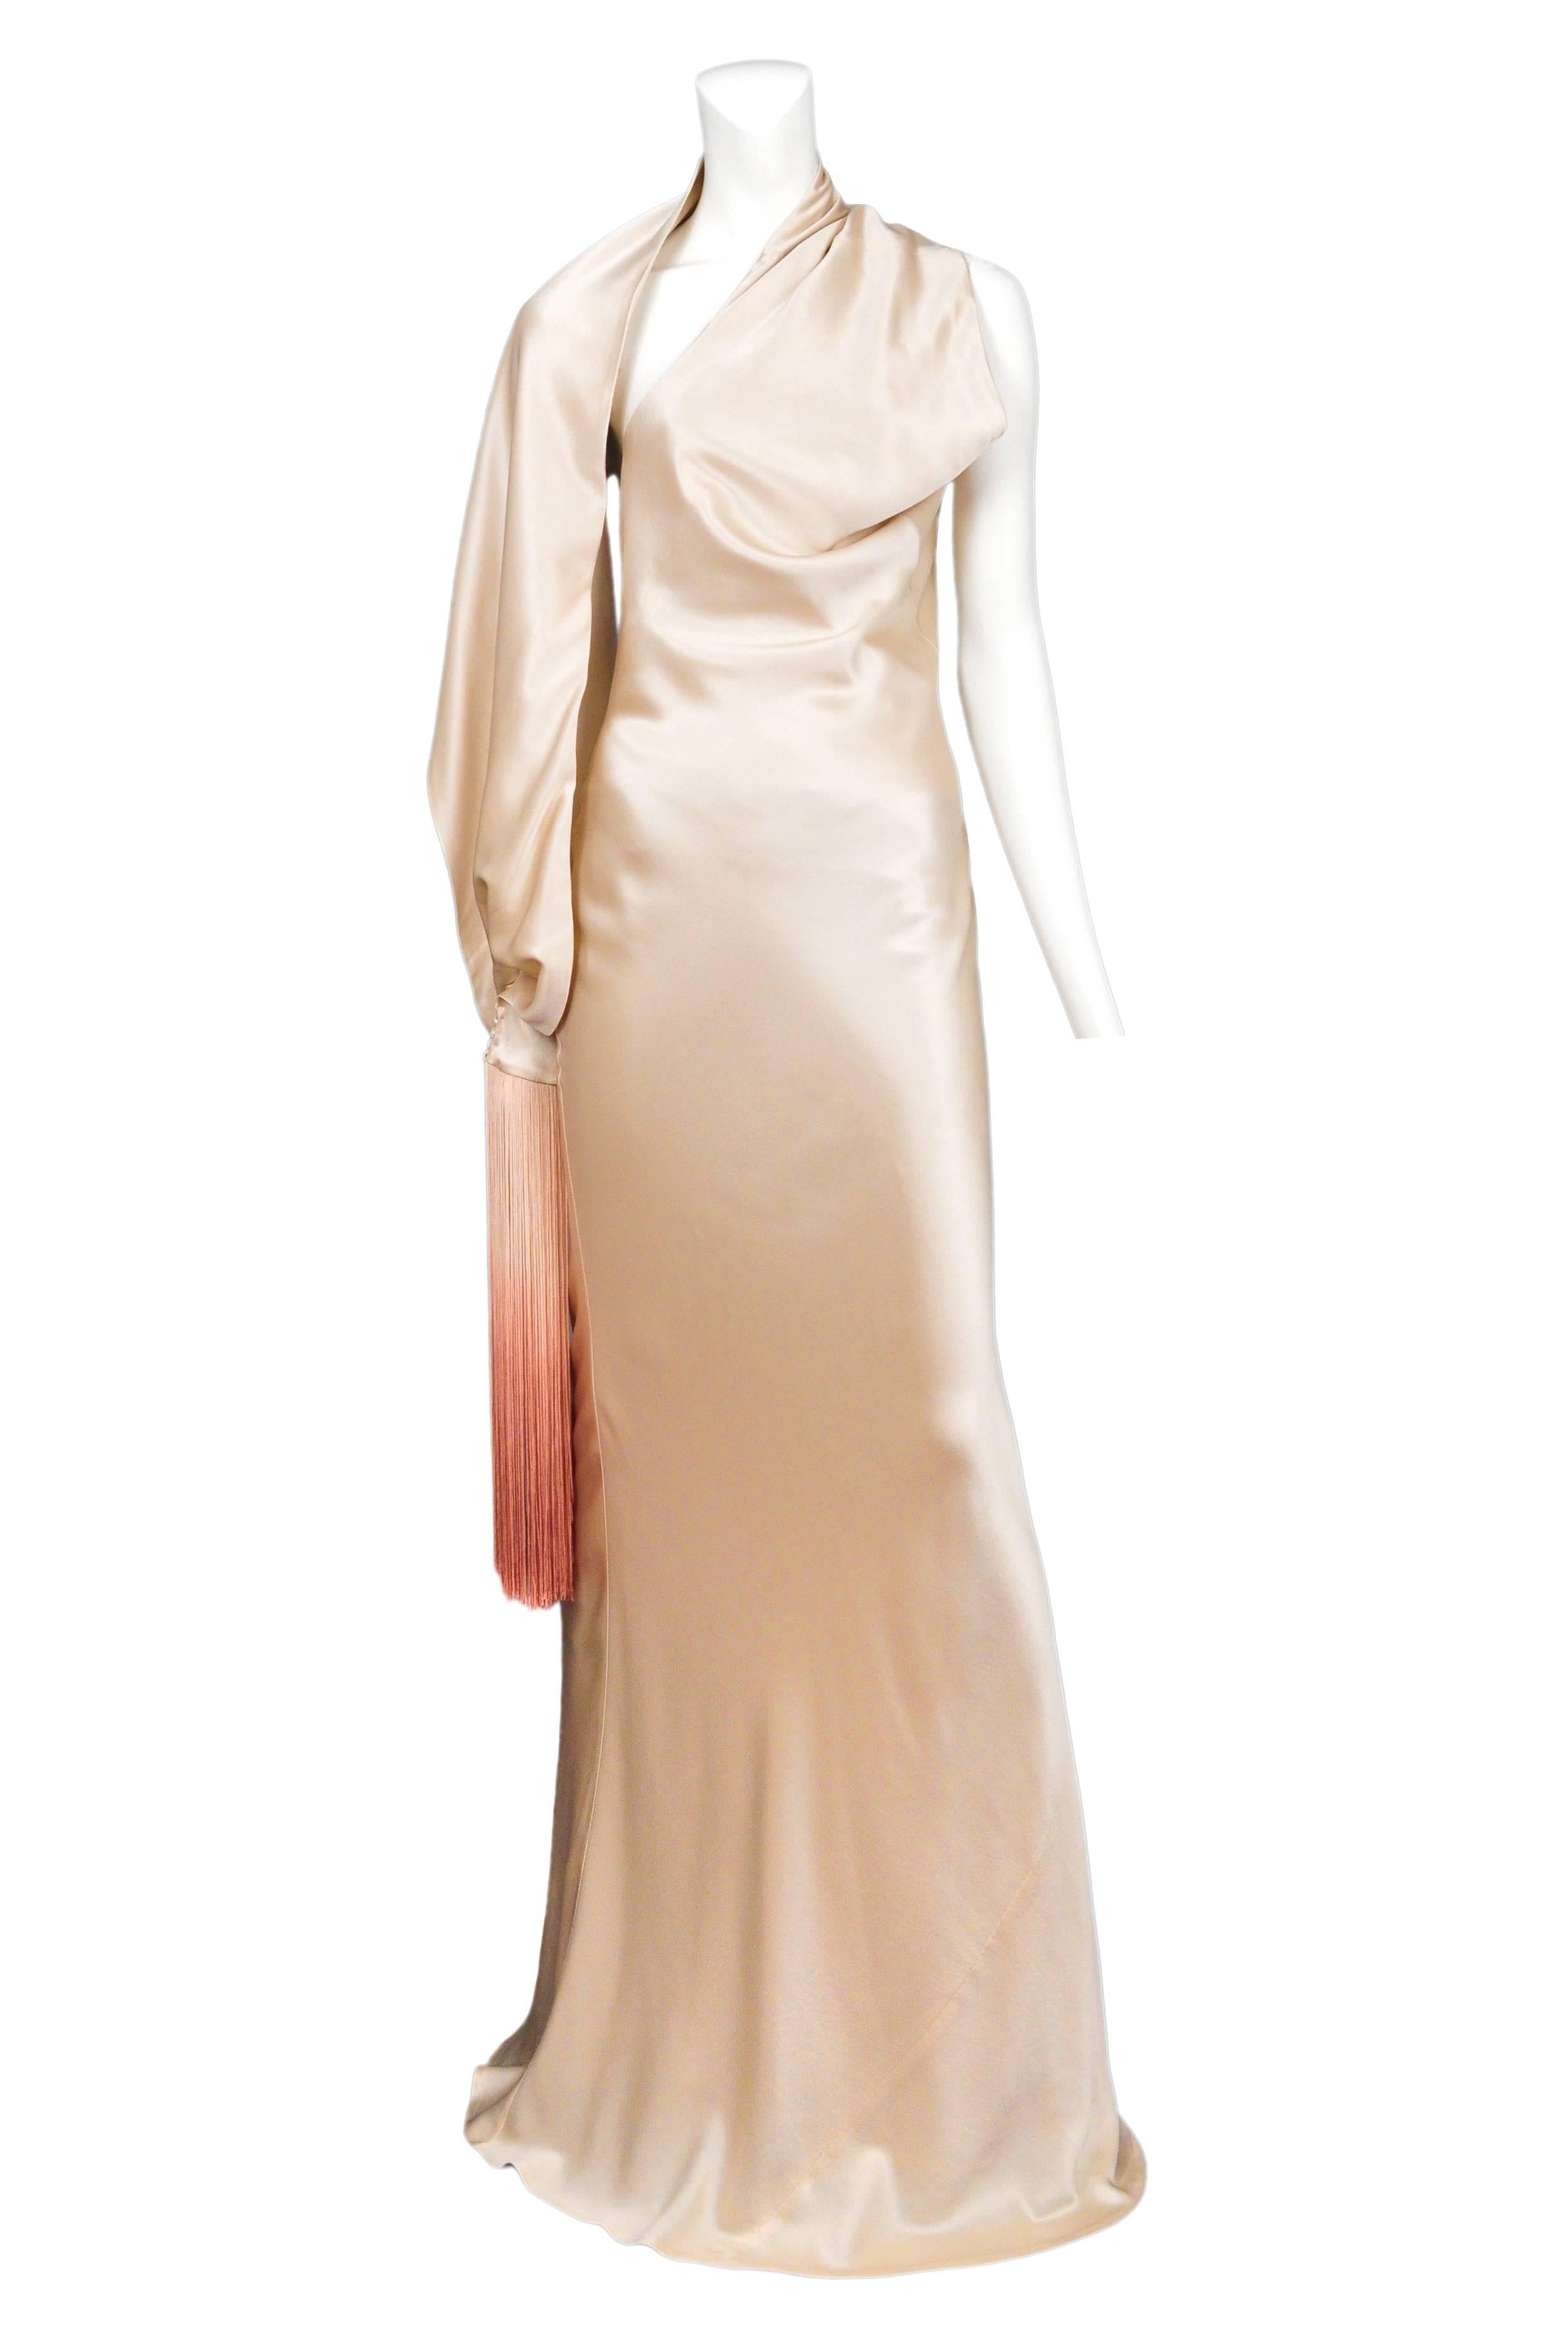 An off white satin asymmetrical bias cut gown with attached shawl sleeve with ombre fringe at cuff. Open back and covered buttons at side. Circa 2009. 

Please contact for more photos or information. 